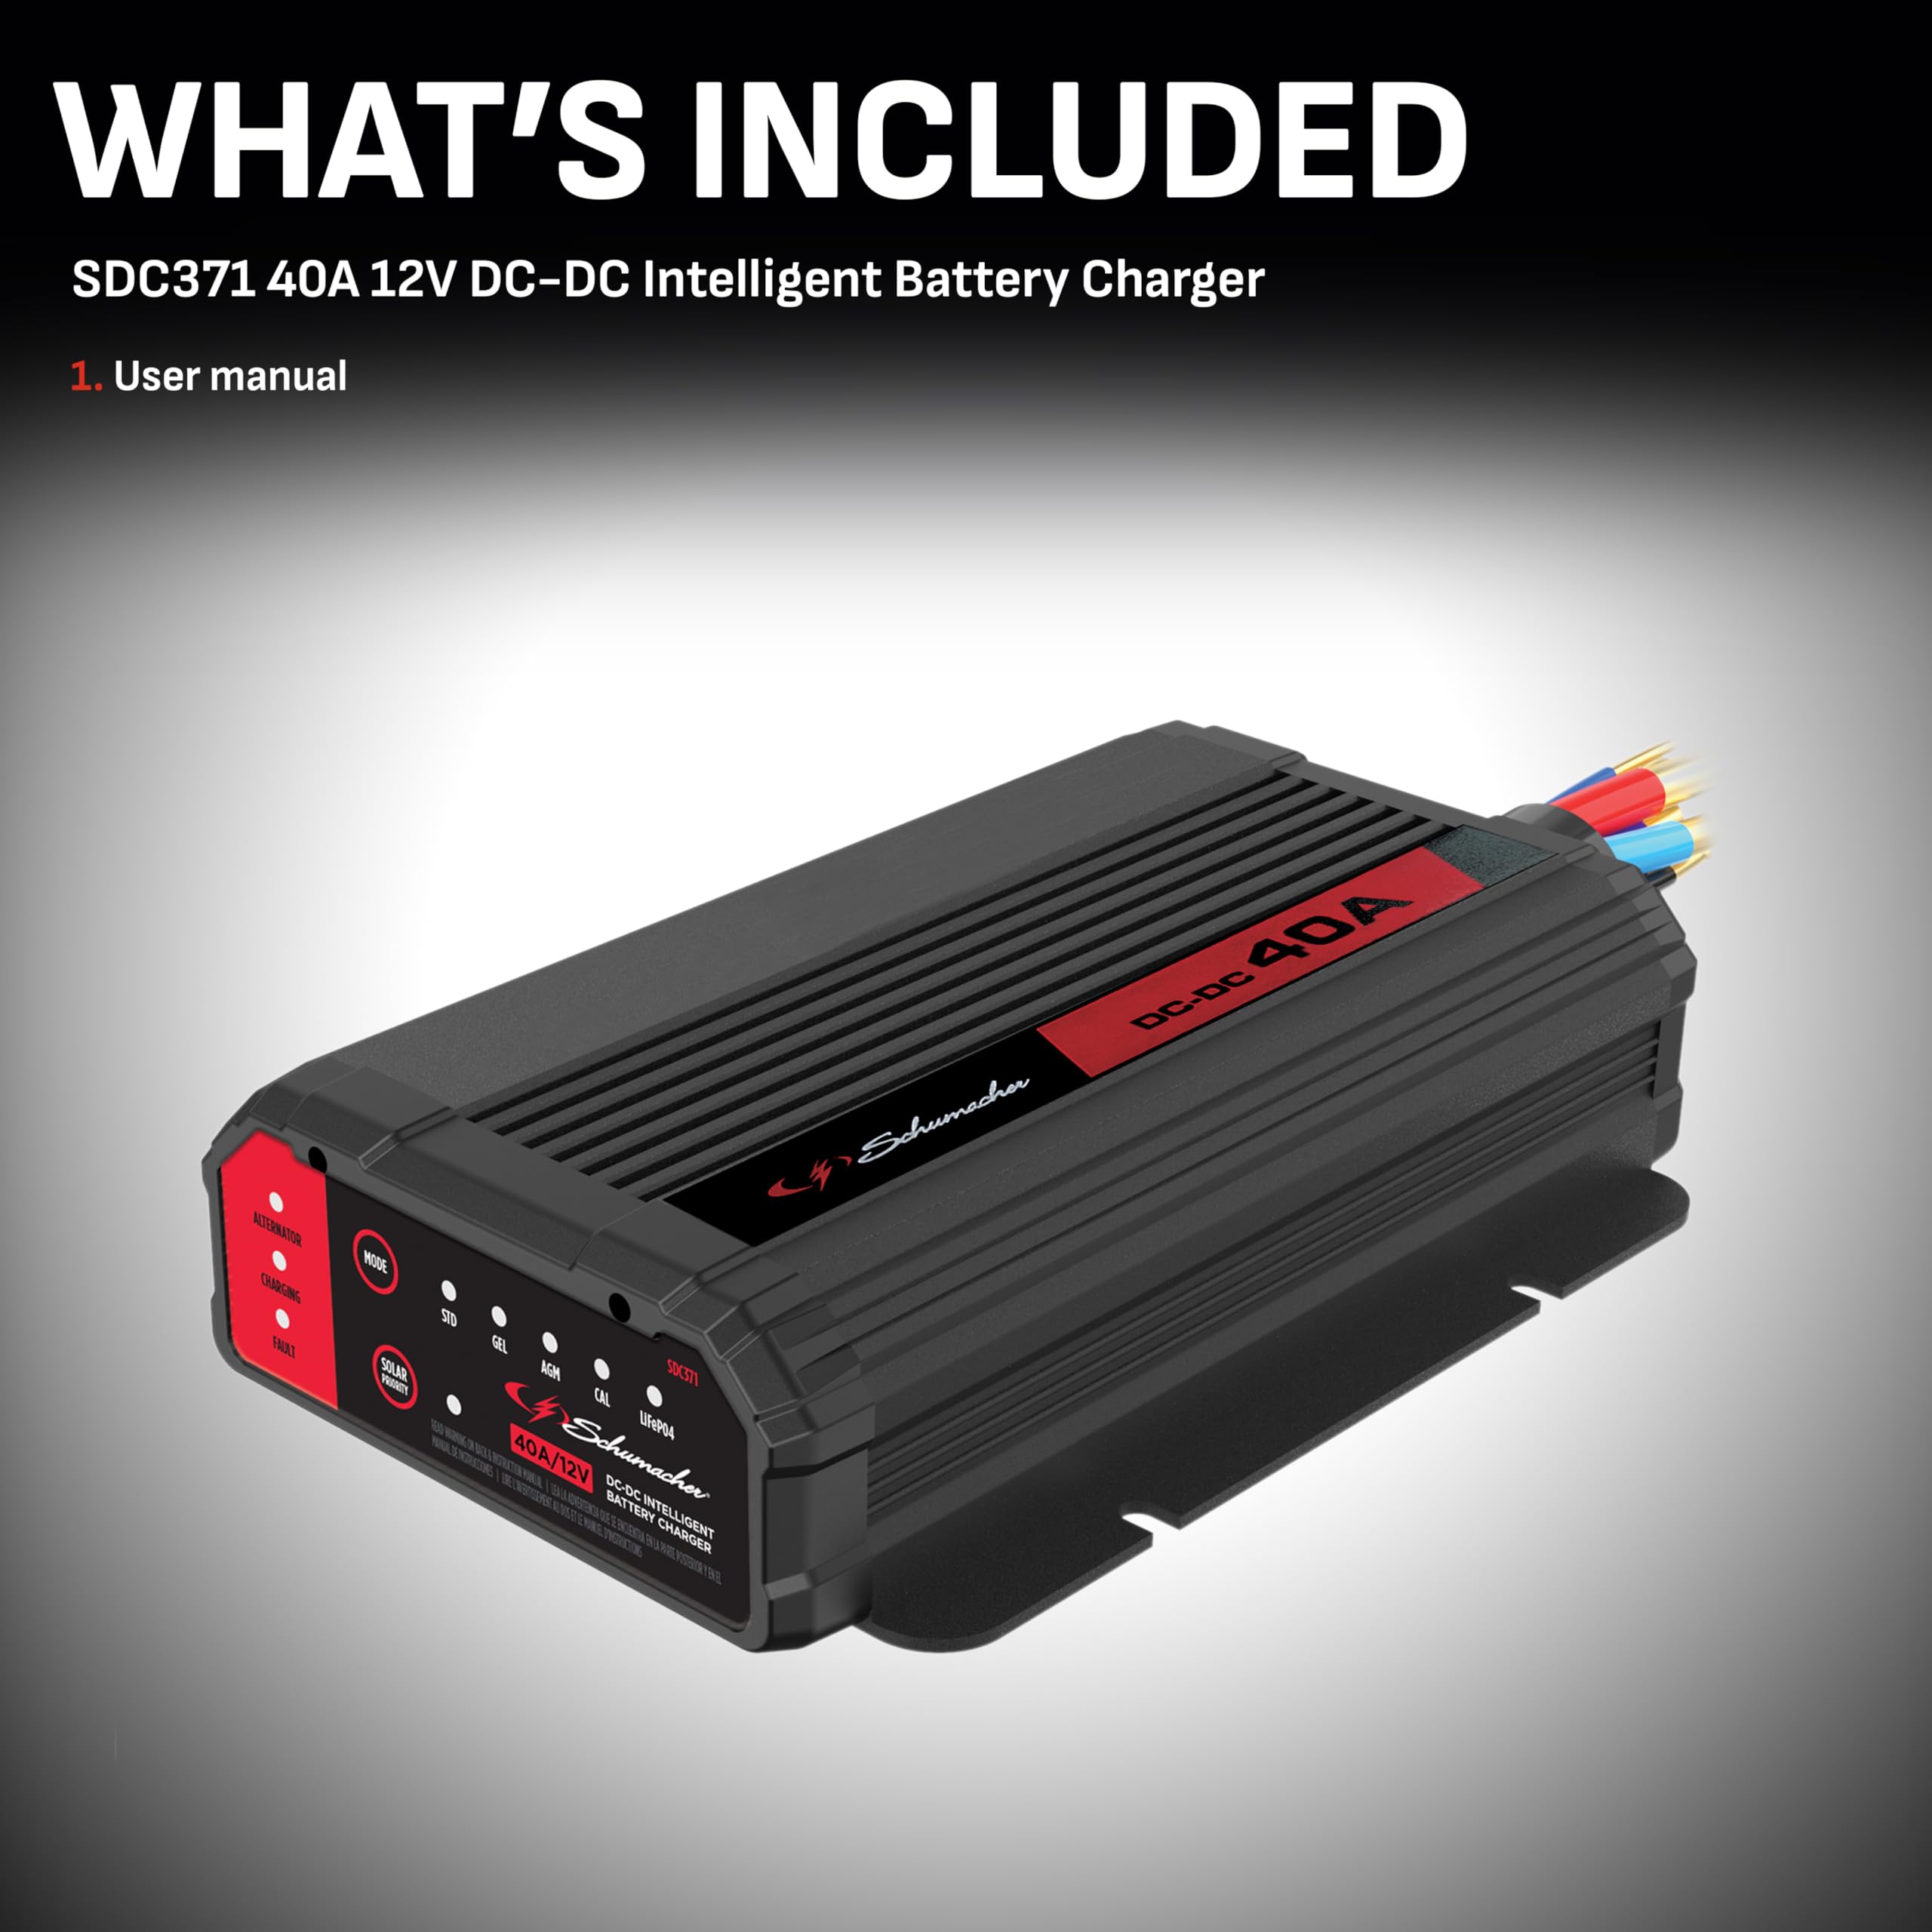 Schumacher SDC371 40A 12V DC-DC Intelligent Battery Charger – Use Solar Power or Vehicle Alternator to Charge Auxiliary Battery – for Cars, RVs, Boats, and Yachts – Off-Grid Power